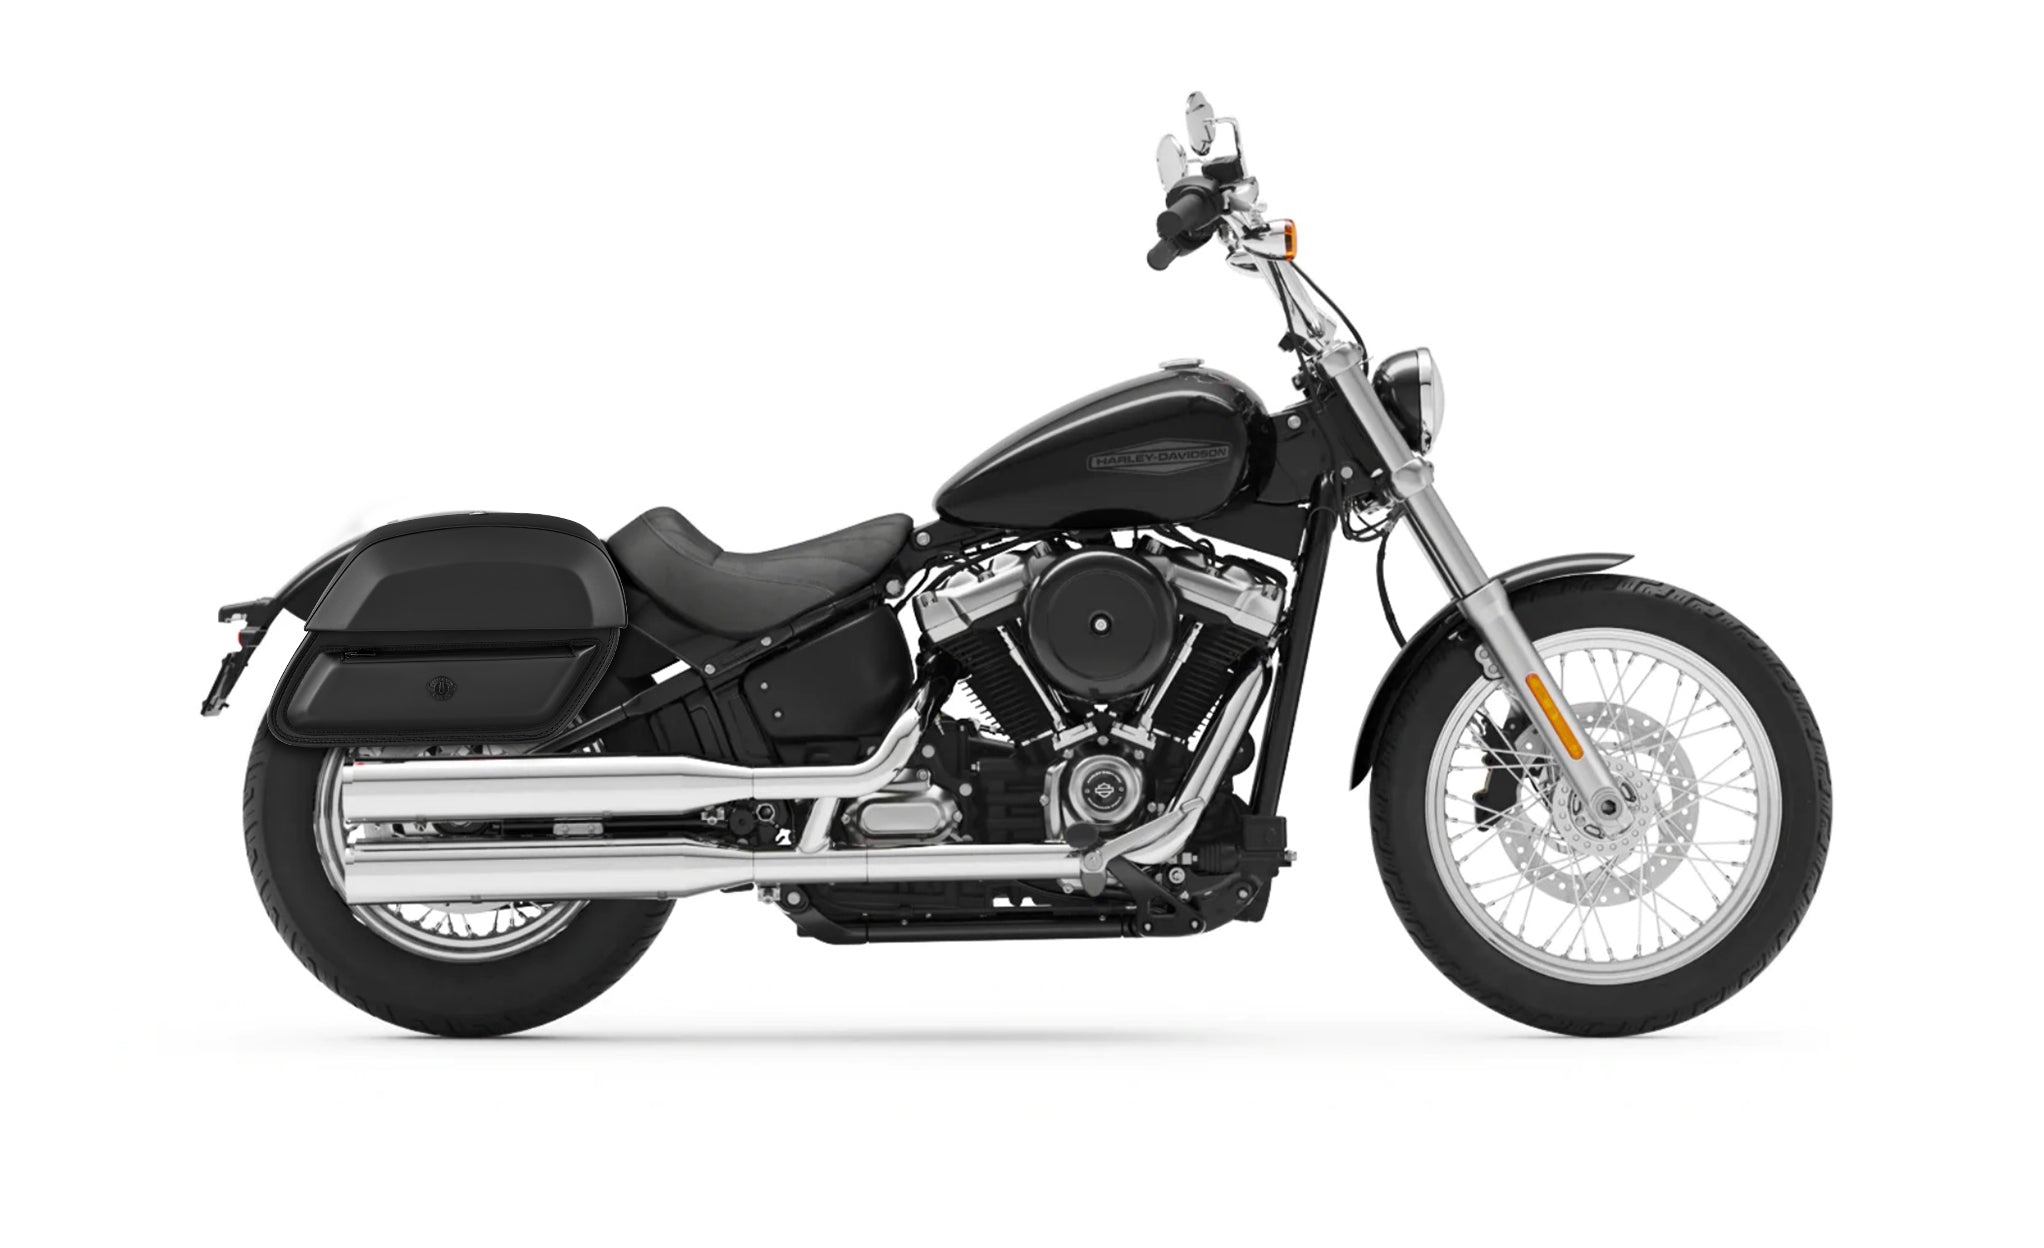 28L - Pantheon Medium Quick-Mount Motorcycle Saddlebags For Harley Softail Standard FXST @expand